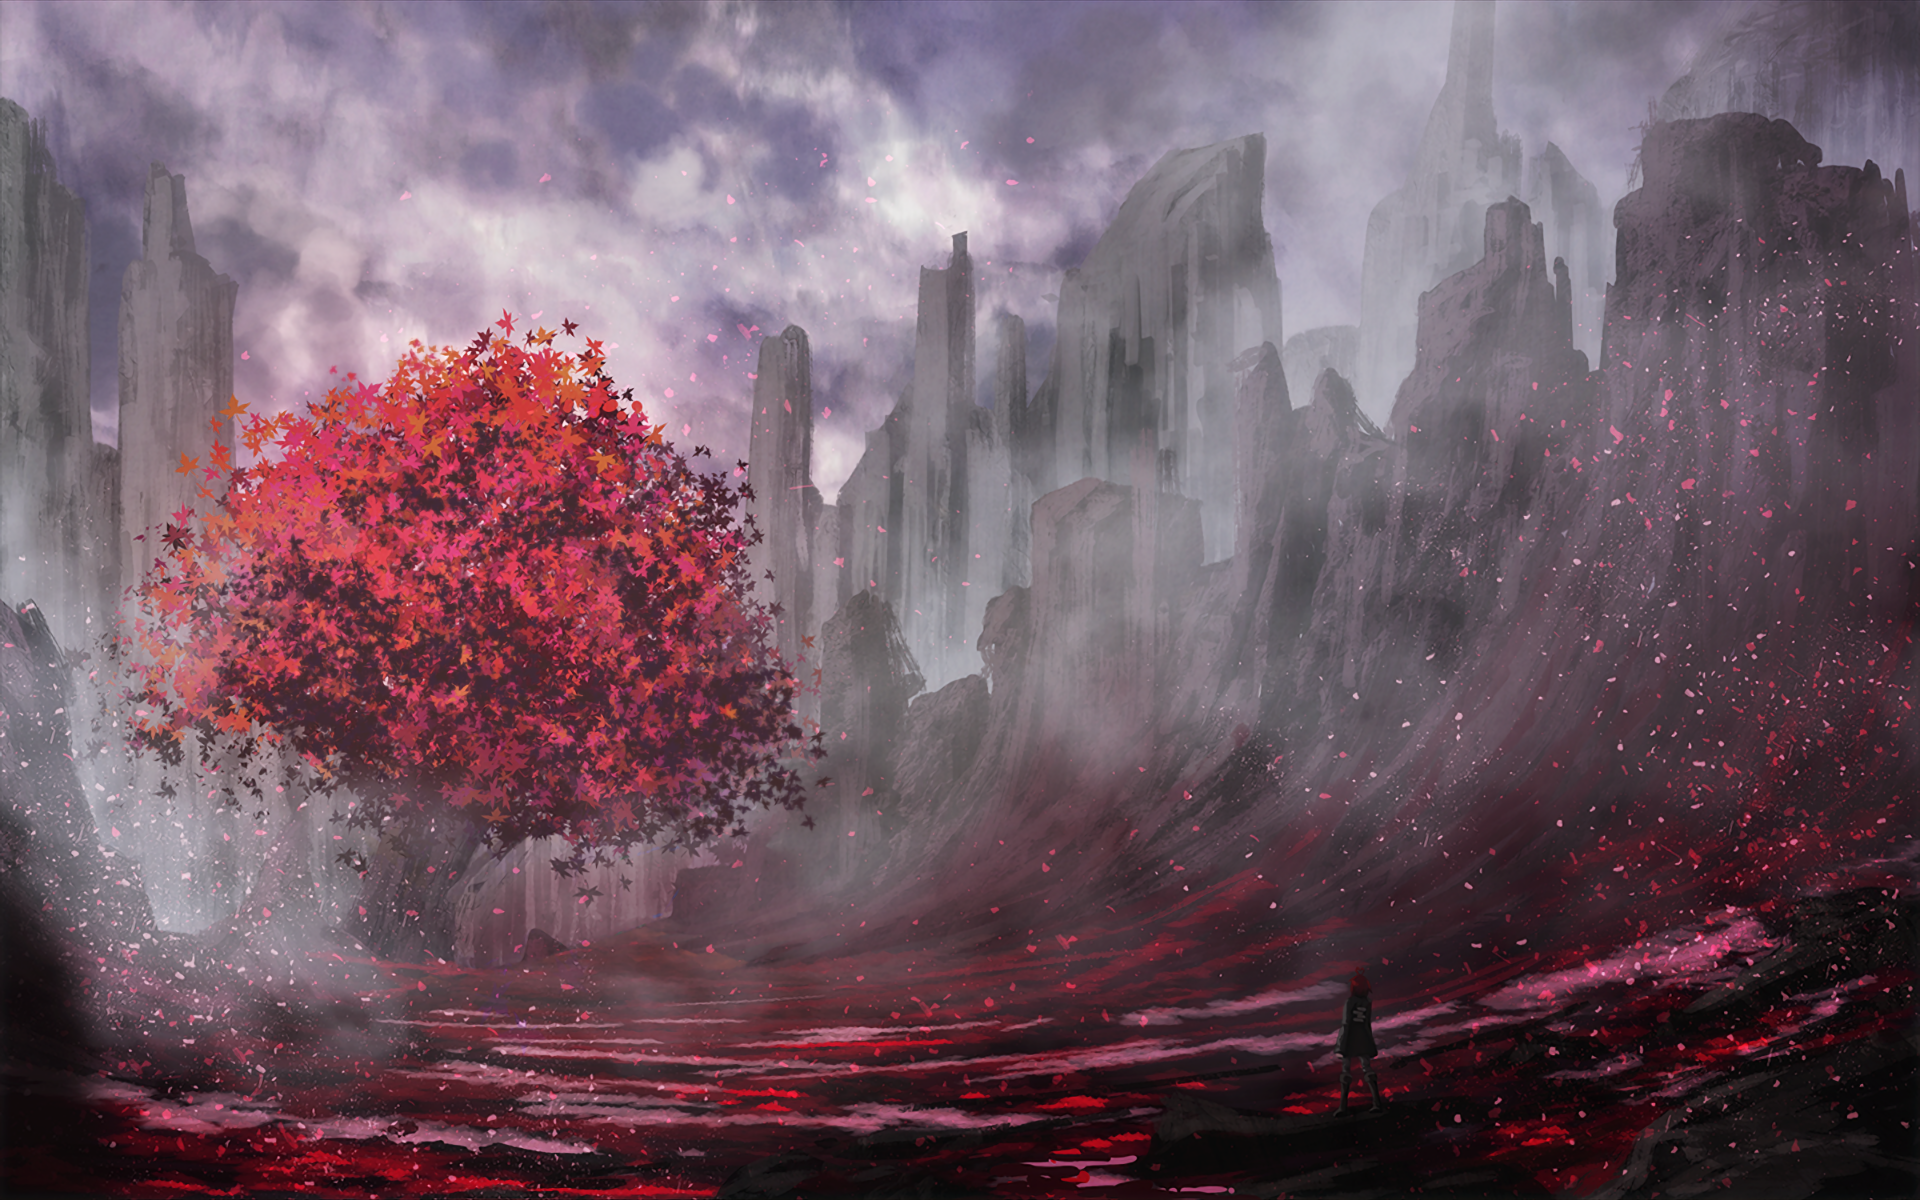 http://wallup.net/wp-content/uploads/2016/06/23/395369-trees-red-fantasy_art-landscape.png